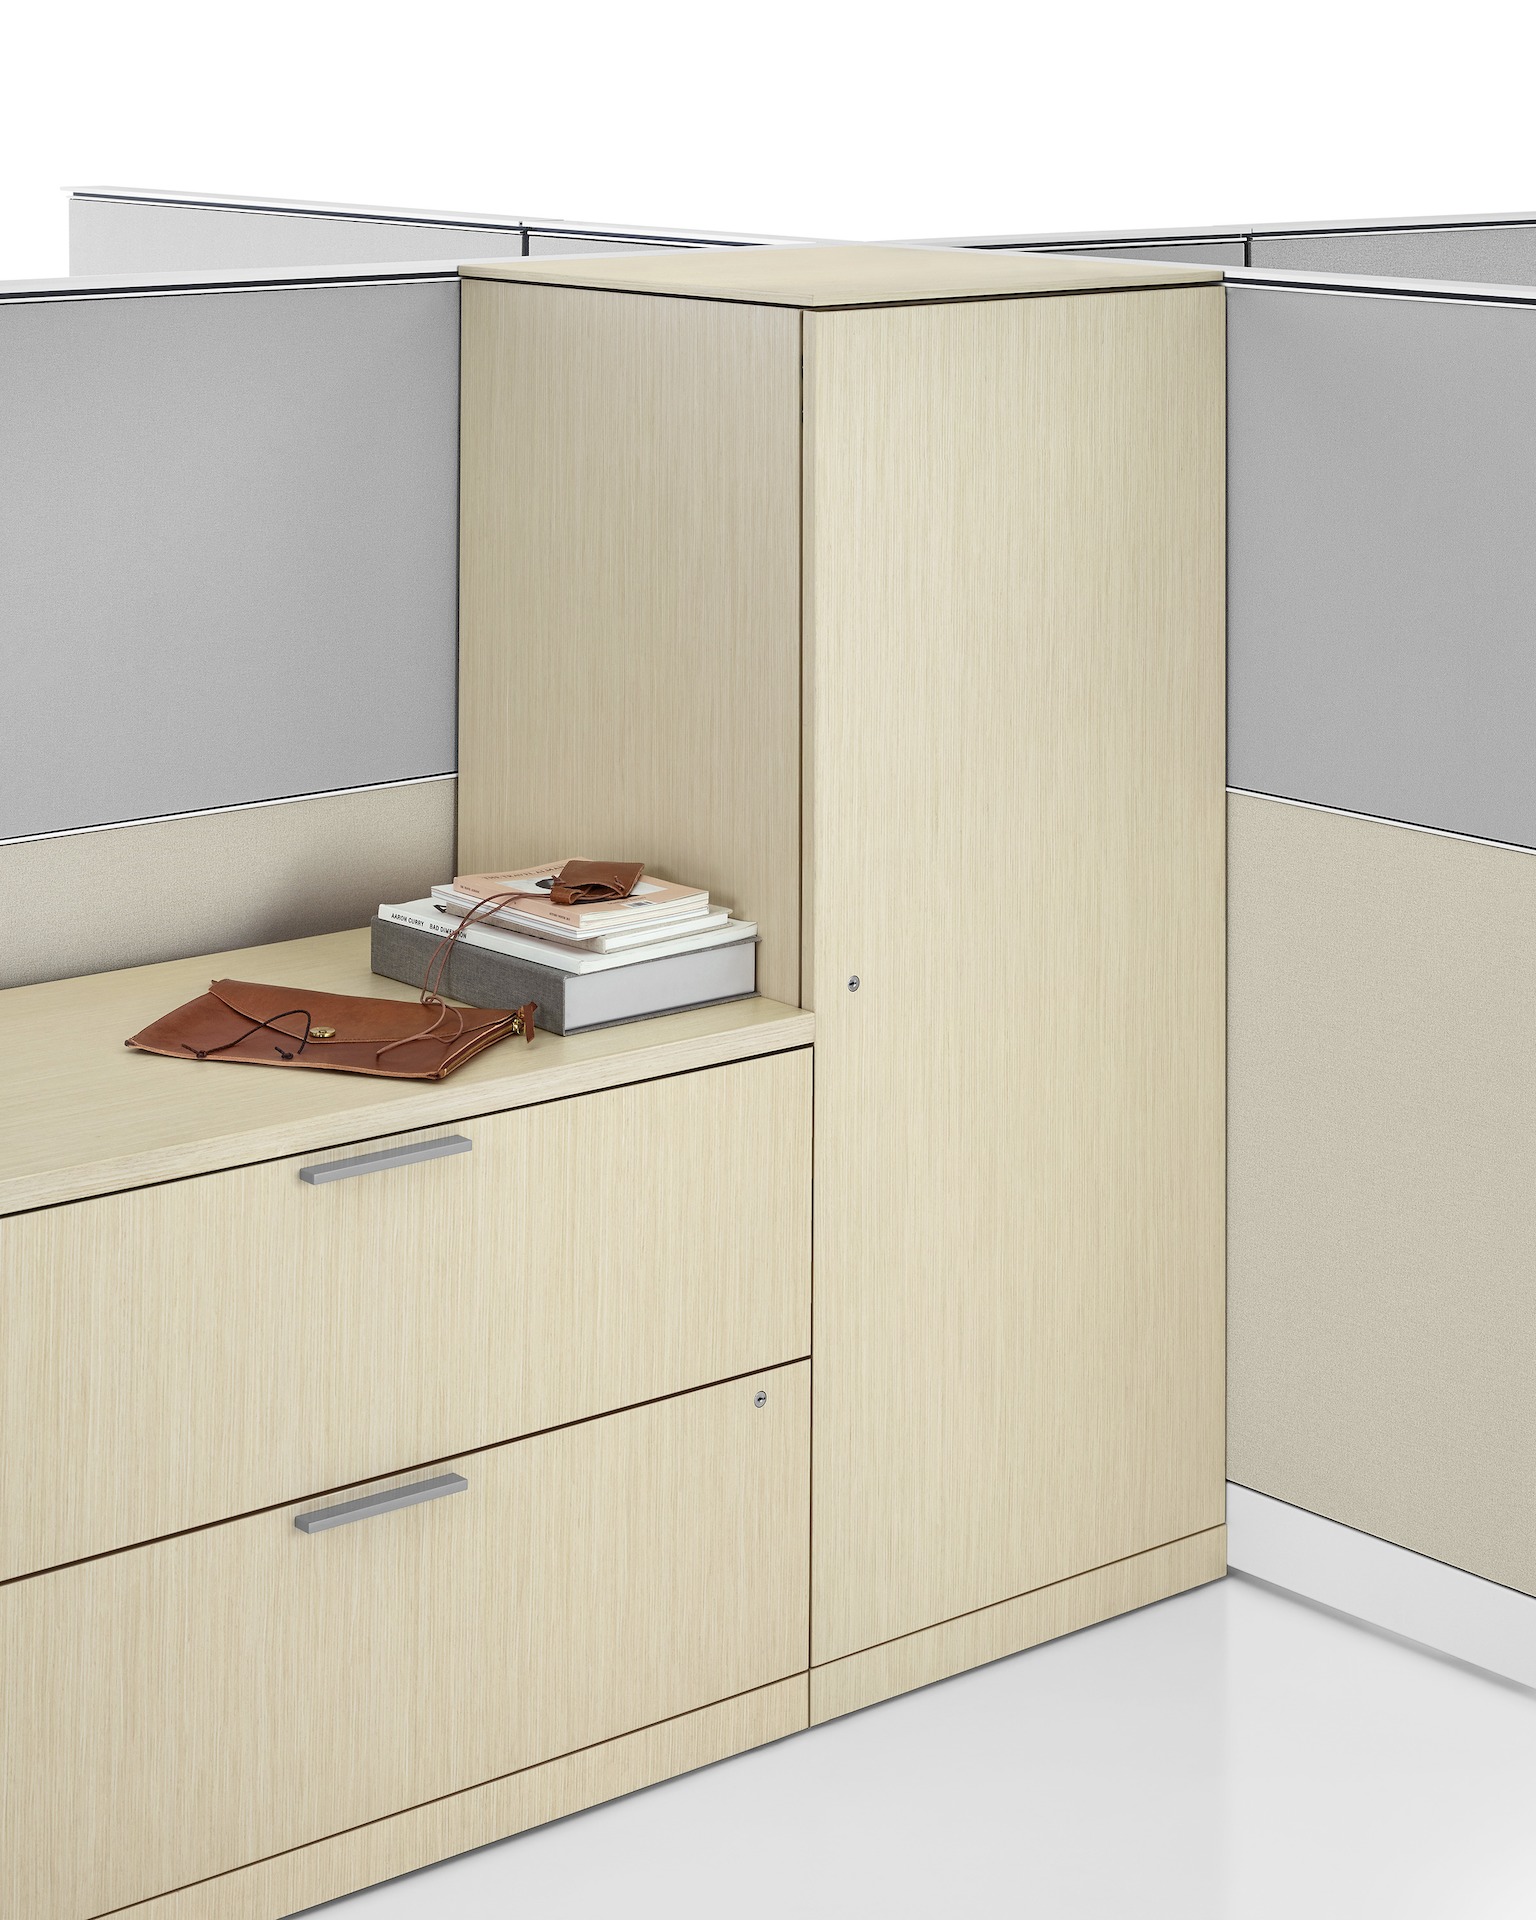 Image of Canvas Storage standing cabinet and drawers.